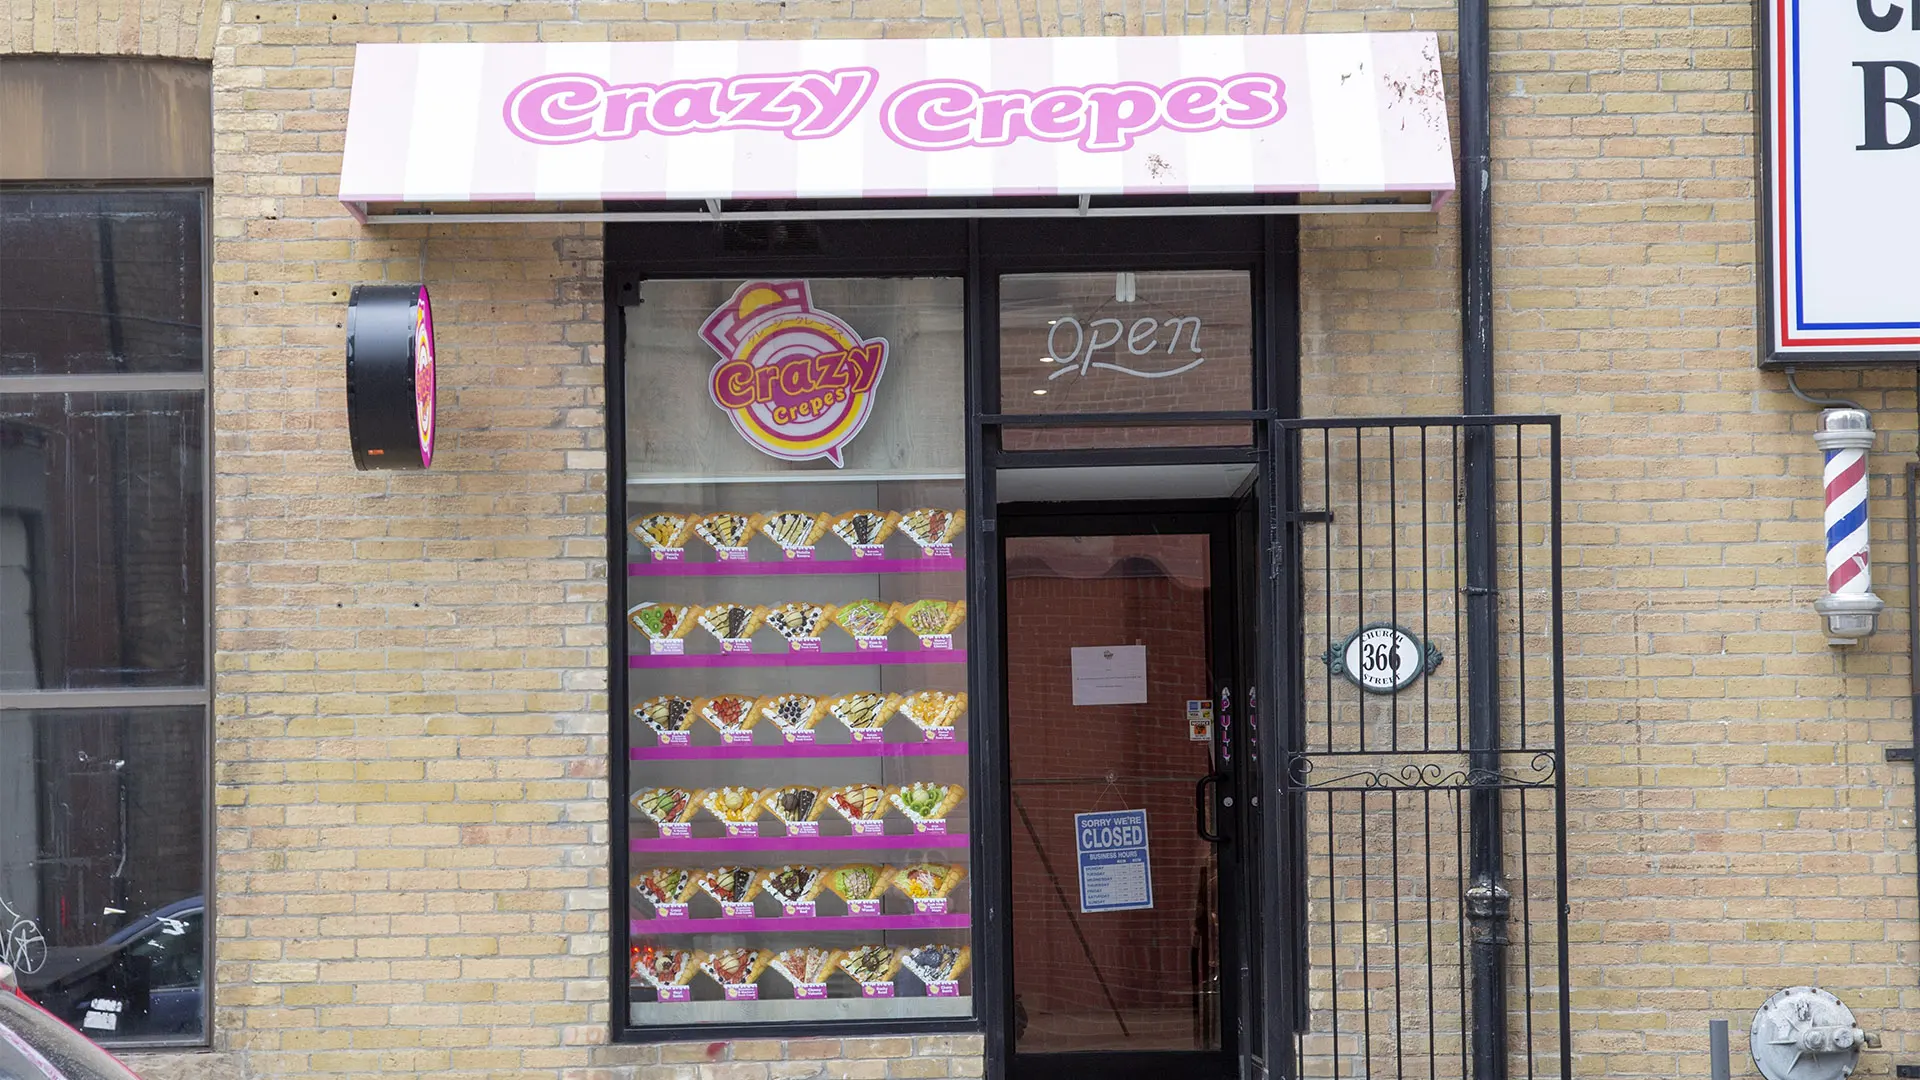 Exterior design project for Crazy Crepes. Designed storefront create a fantastical atmosphere with camera-ready installations